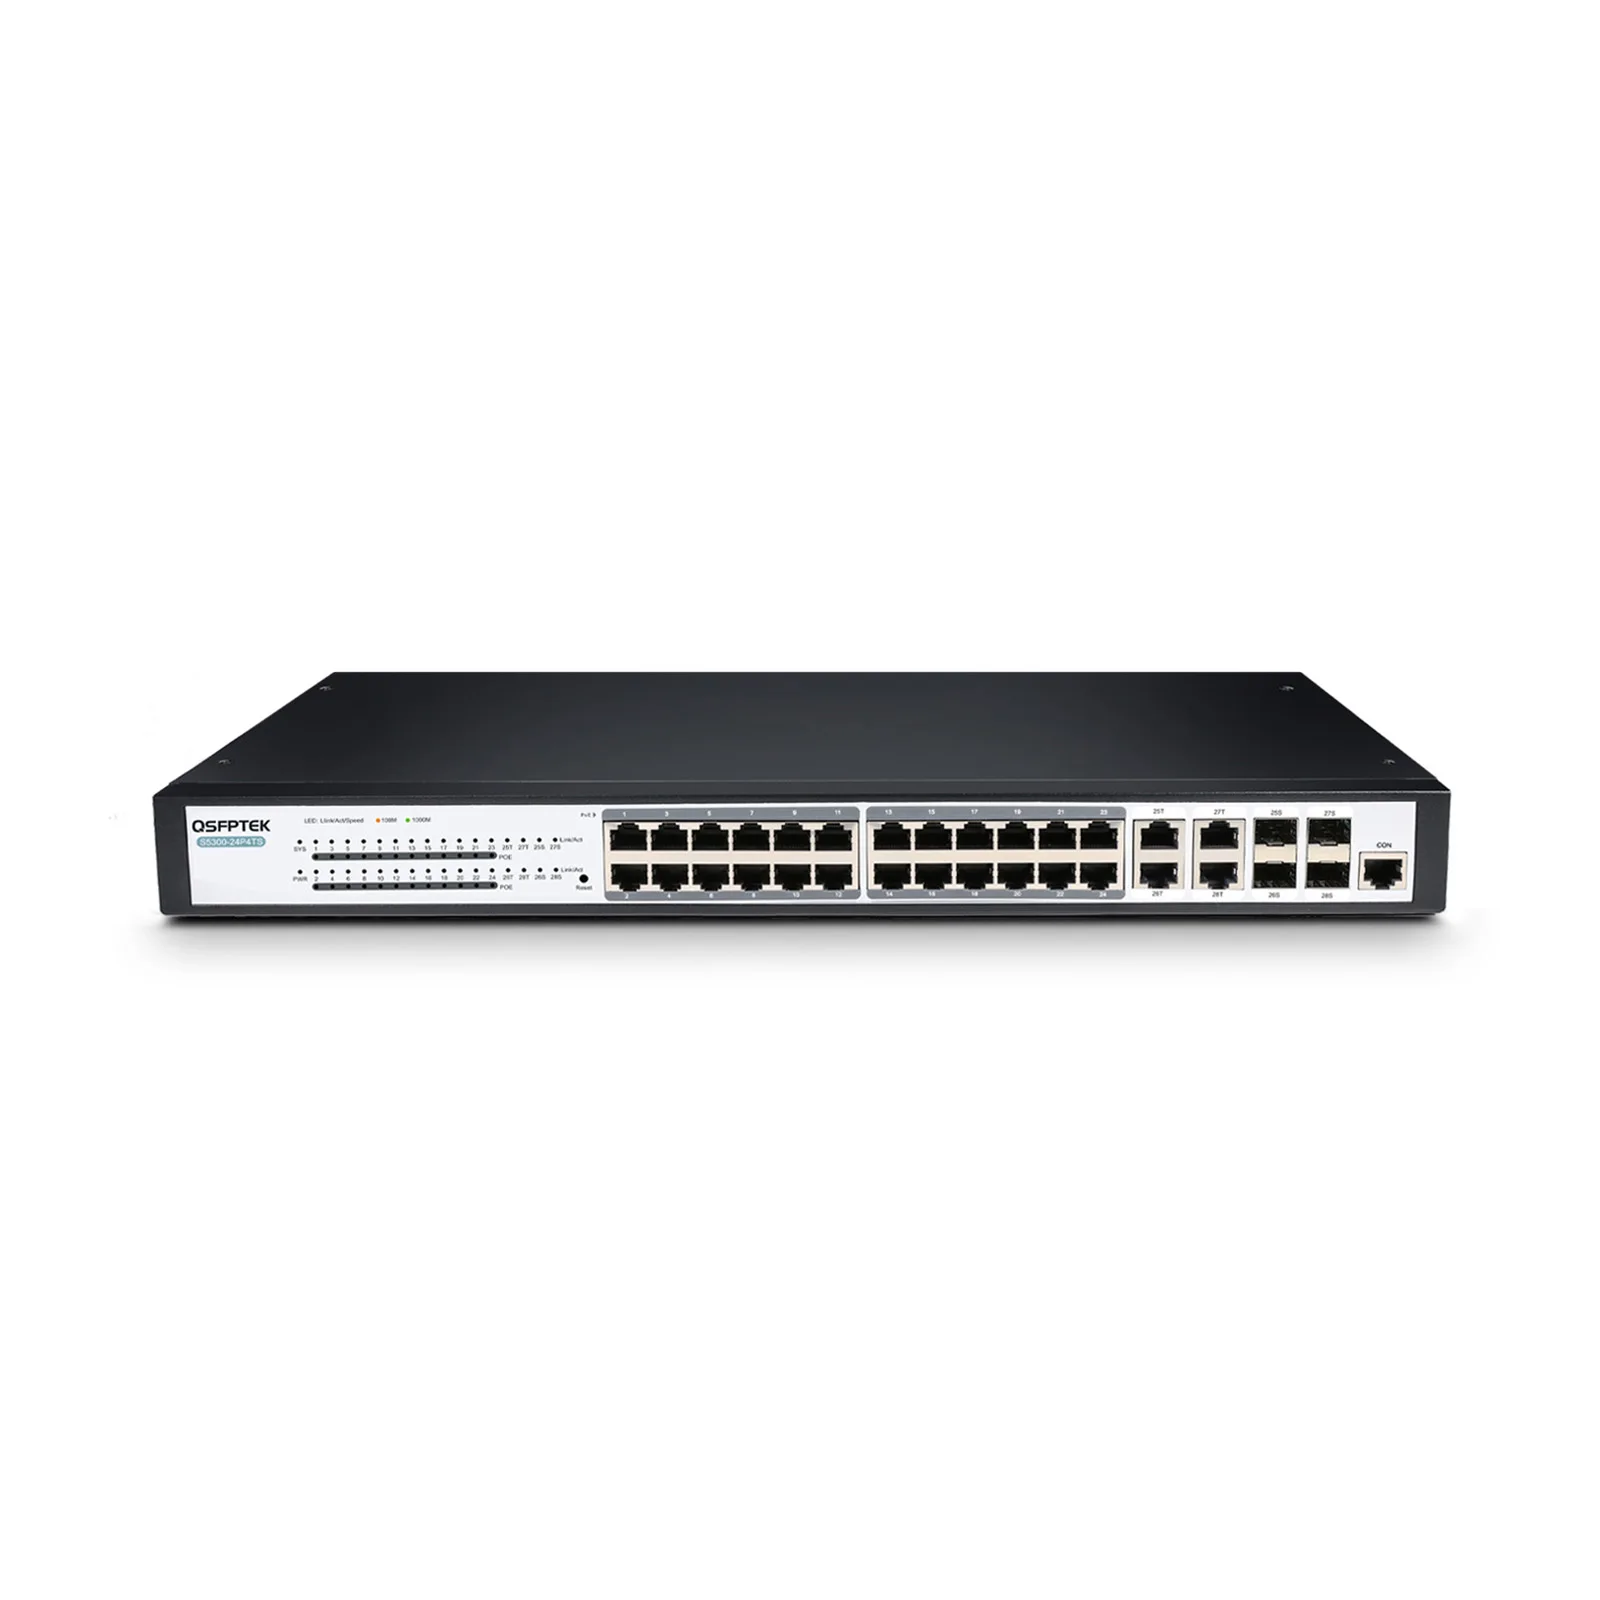 1G/10Gb Ethernet Switches, Industrial Ethernet Switches